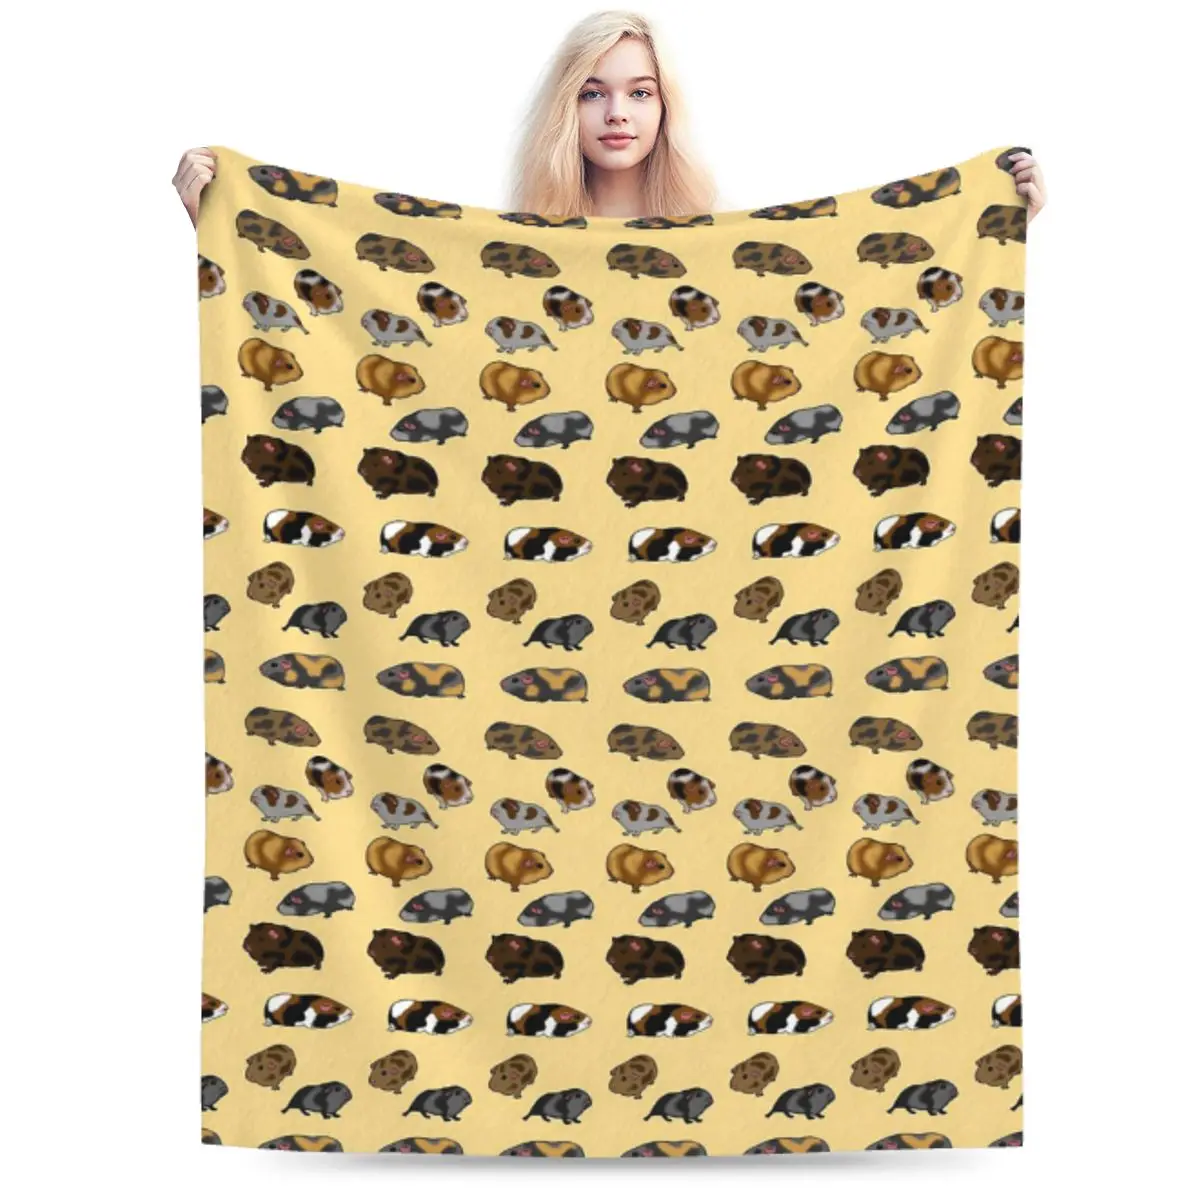 

Guinea Pig Soft Flannel Throw Blanket for Couch Bed Sofa Cover Blanket Warm Blankets Travel Blanket